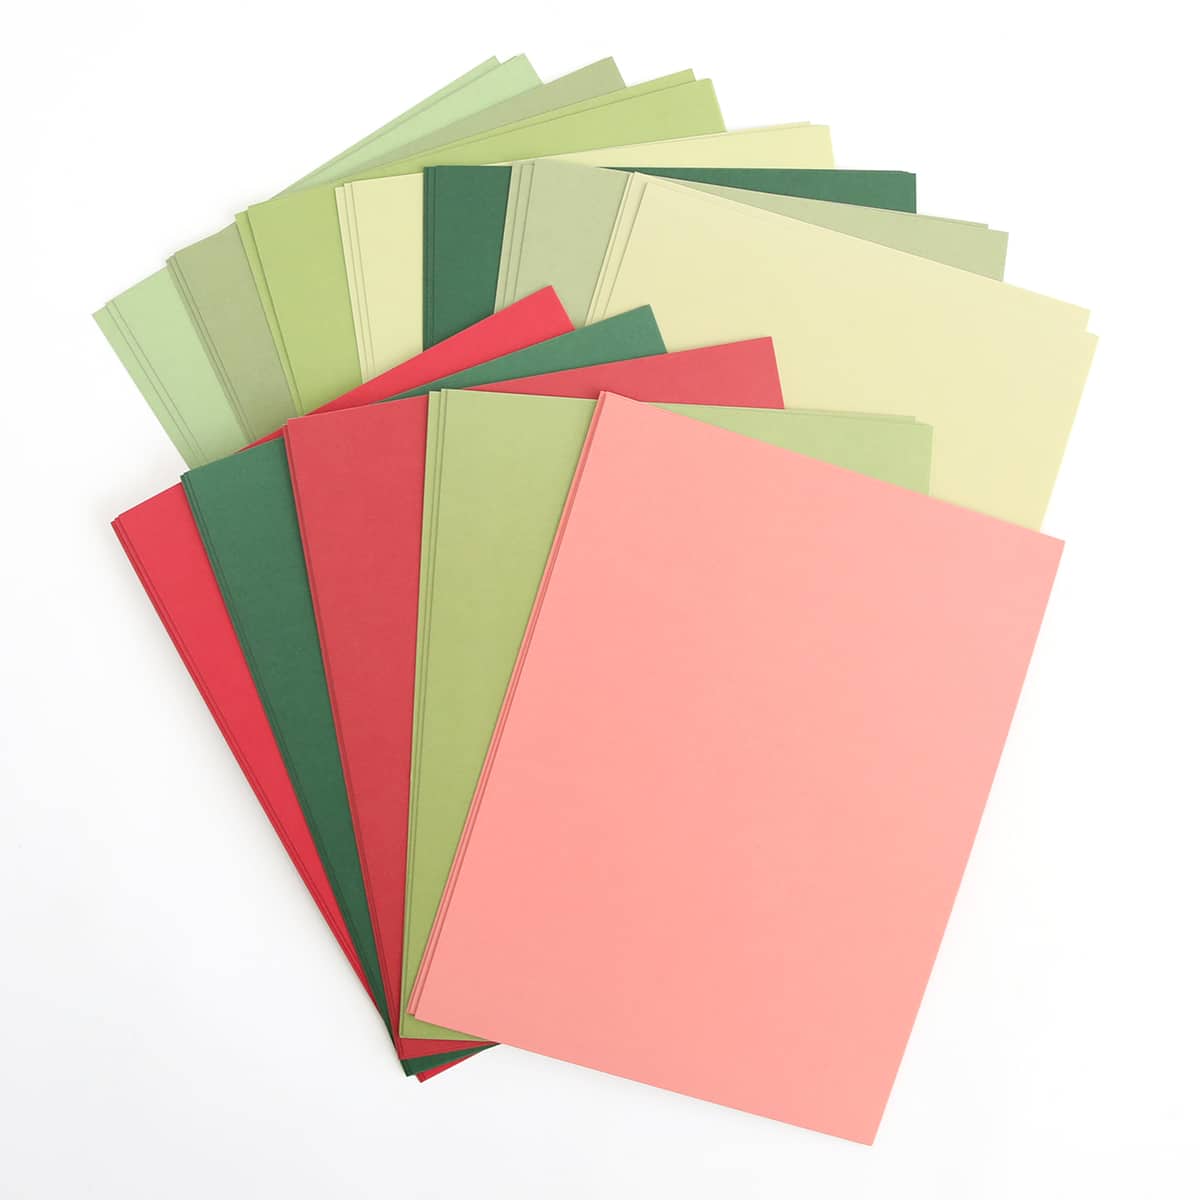 a stack of different colored papers on a white surface.